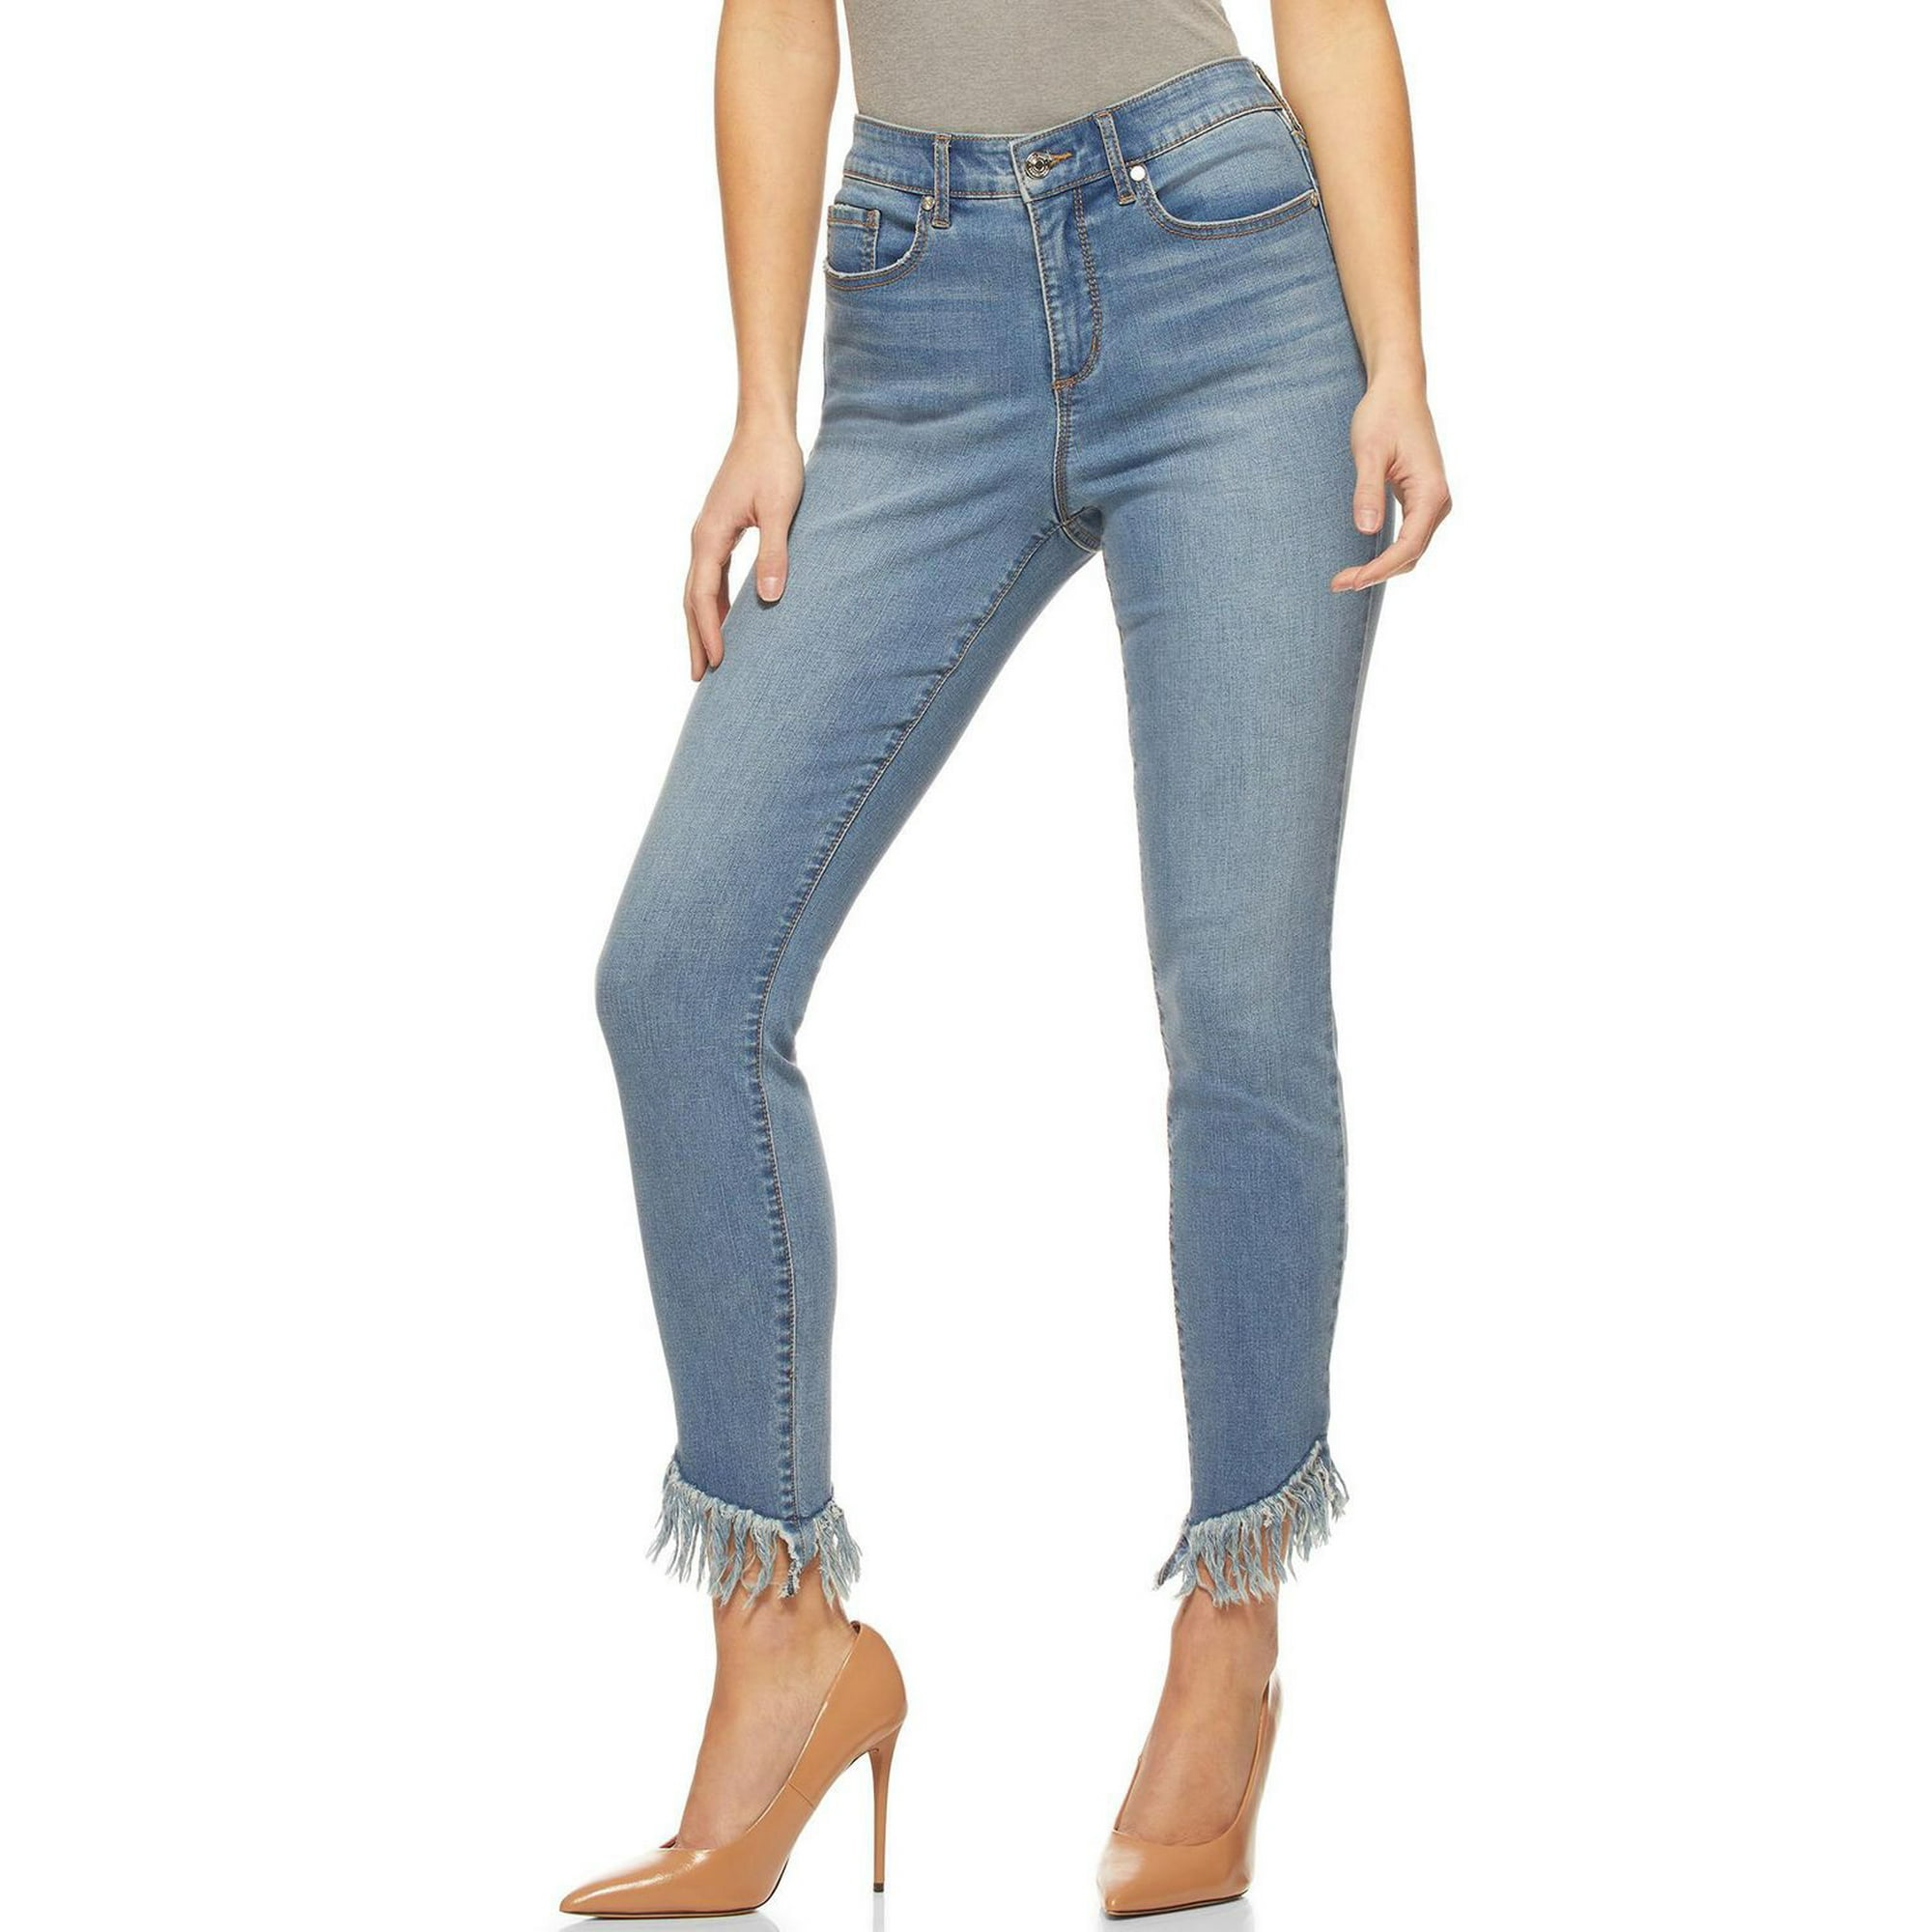 Sofia Vergara Wears 7 For All Mankind Ankle Skinny Jeans - THE JEANS BLOG